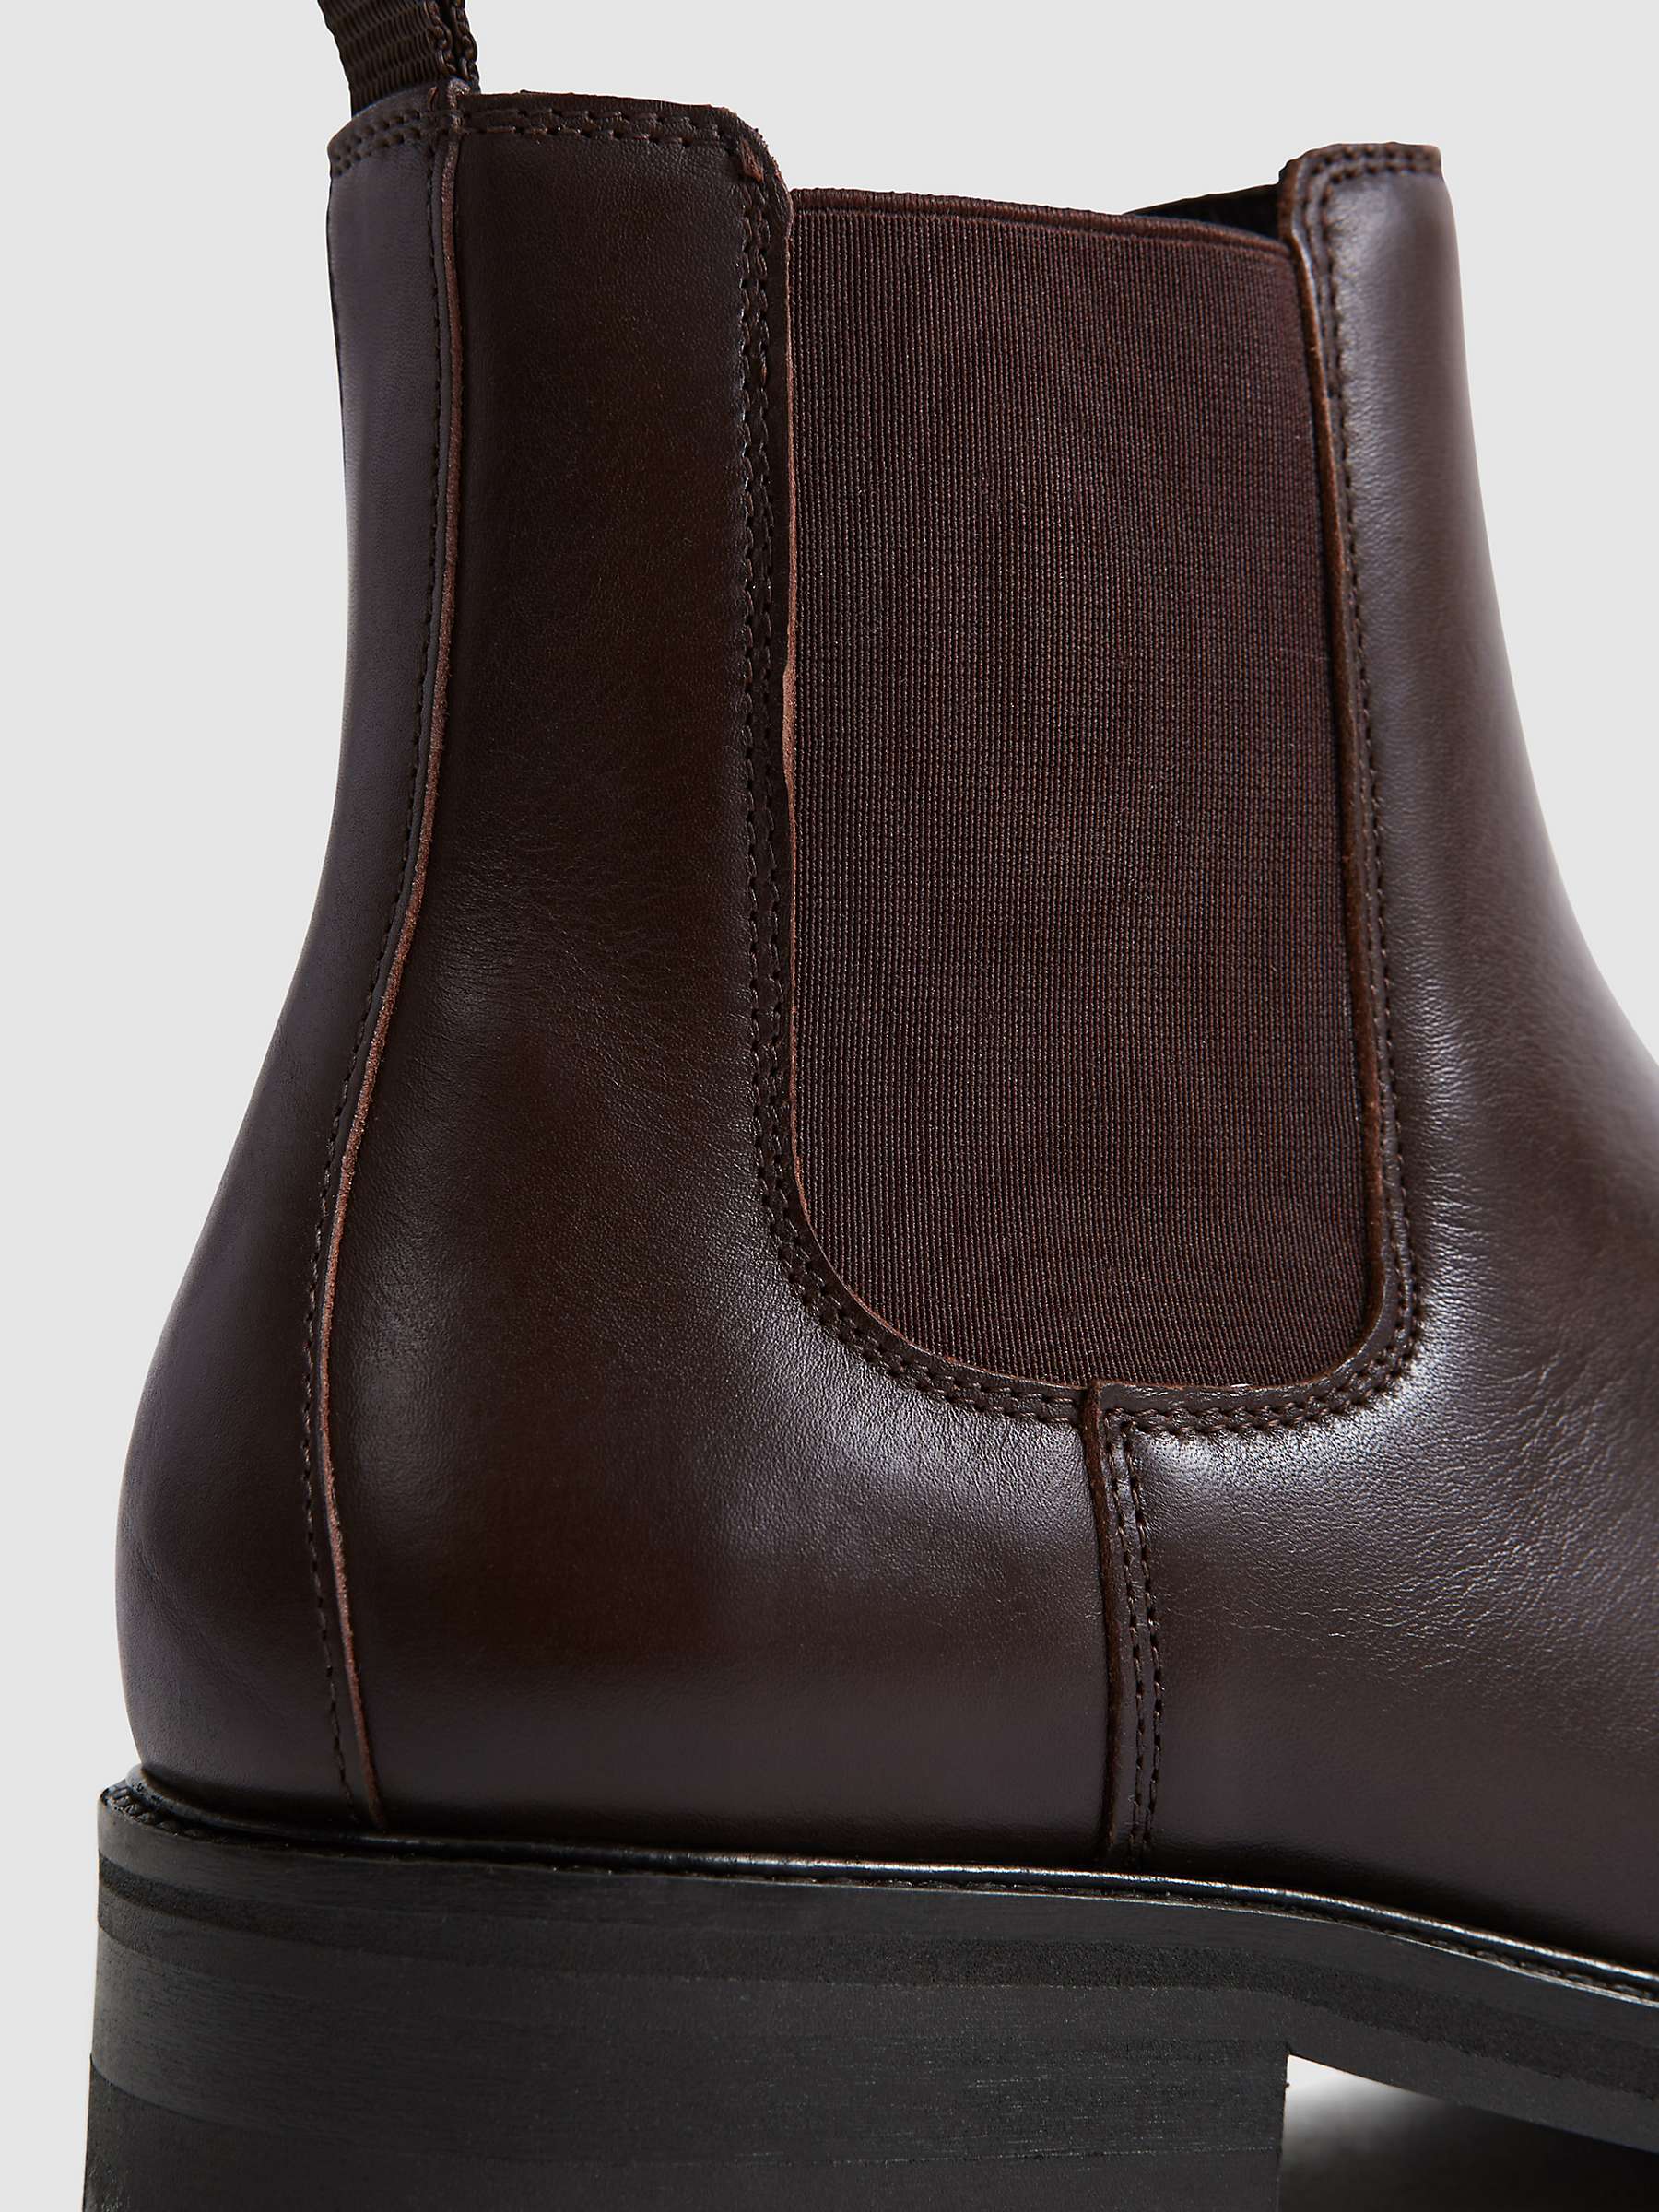 Buy Reiss Chiltern Chelsea Boots, Chocolate Online at johnlewis.com